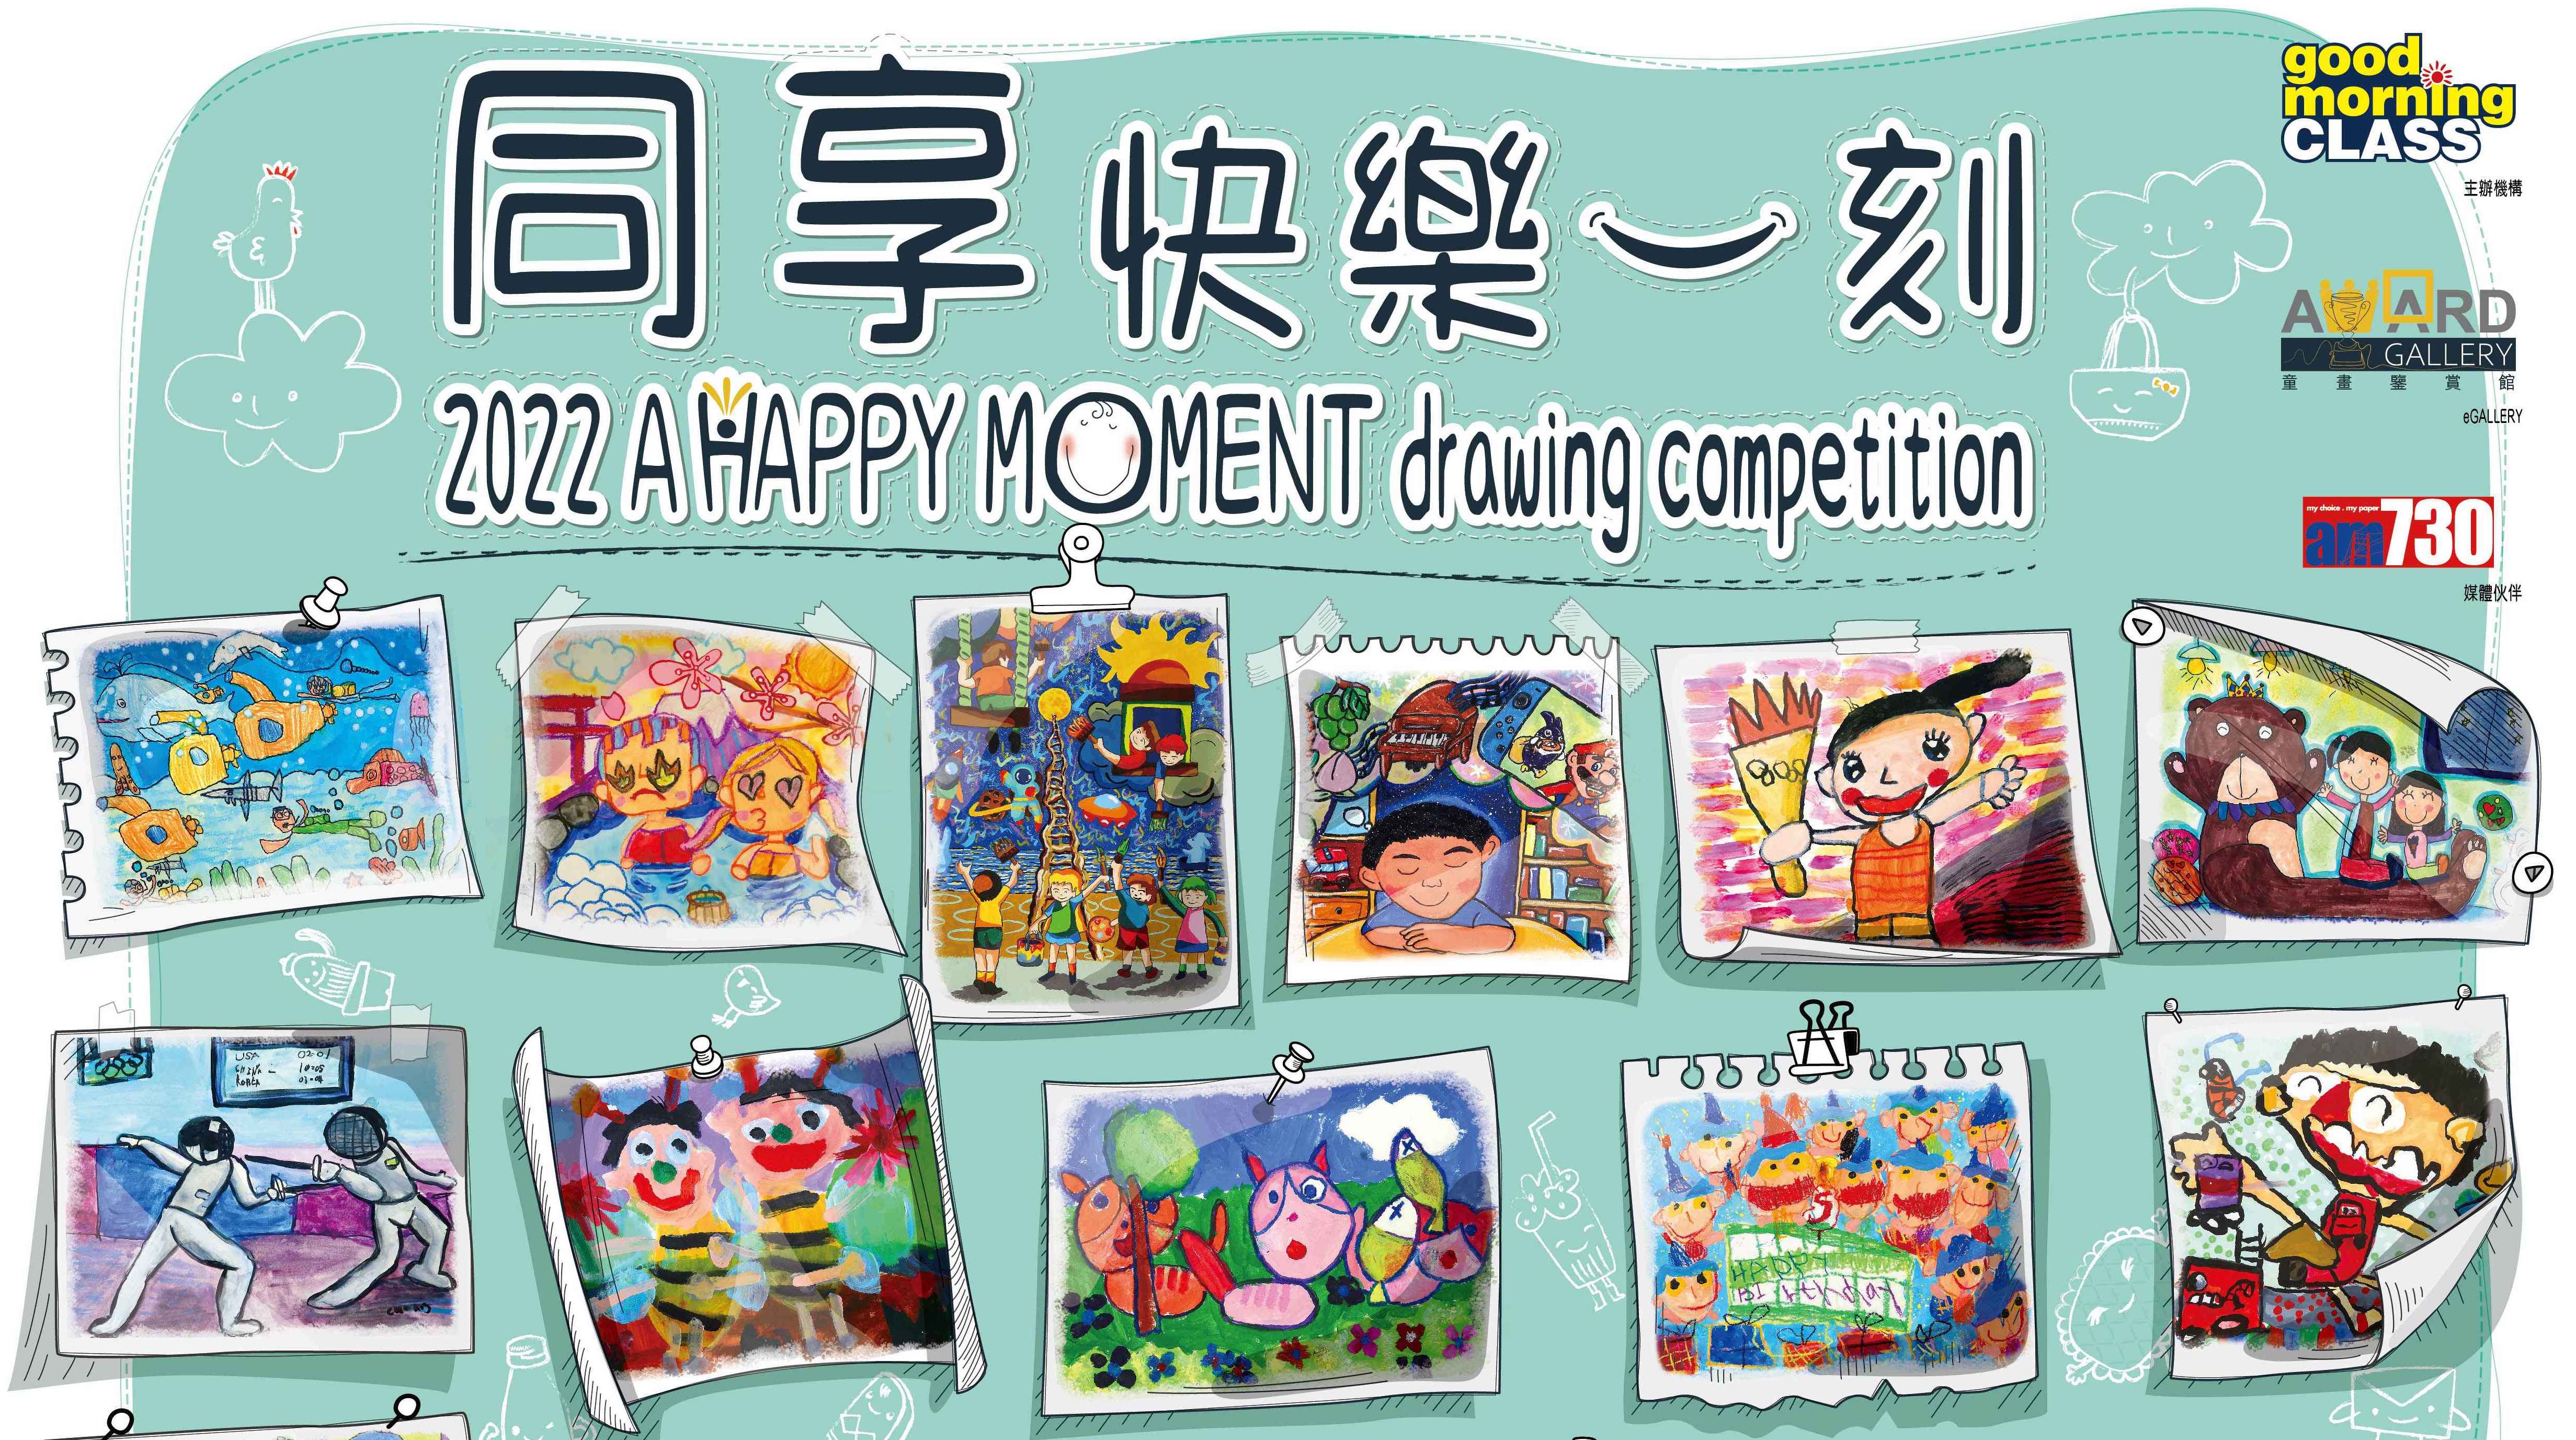 2022 A HAPPY MOMENT drawing competition